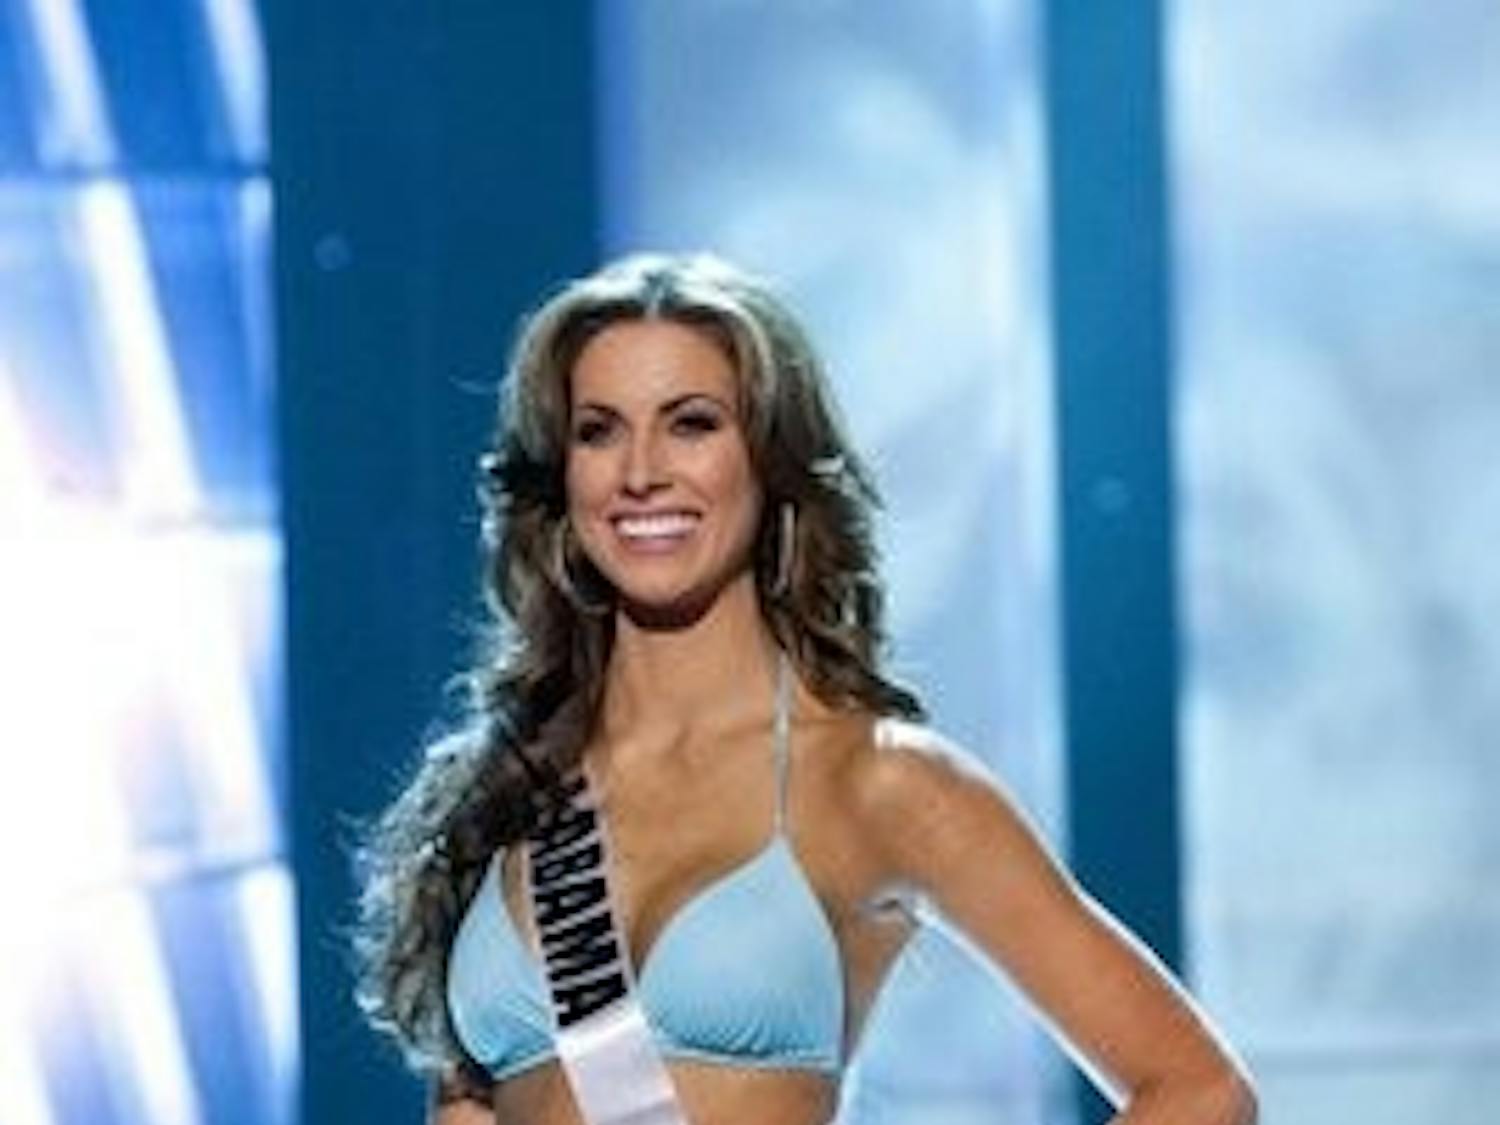 Katherine Webb placed in the top 10 at this year's Miss USA pageant. (Courtesy of Katherine Webb)